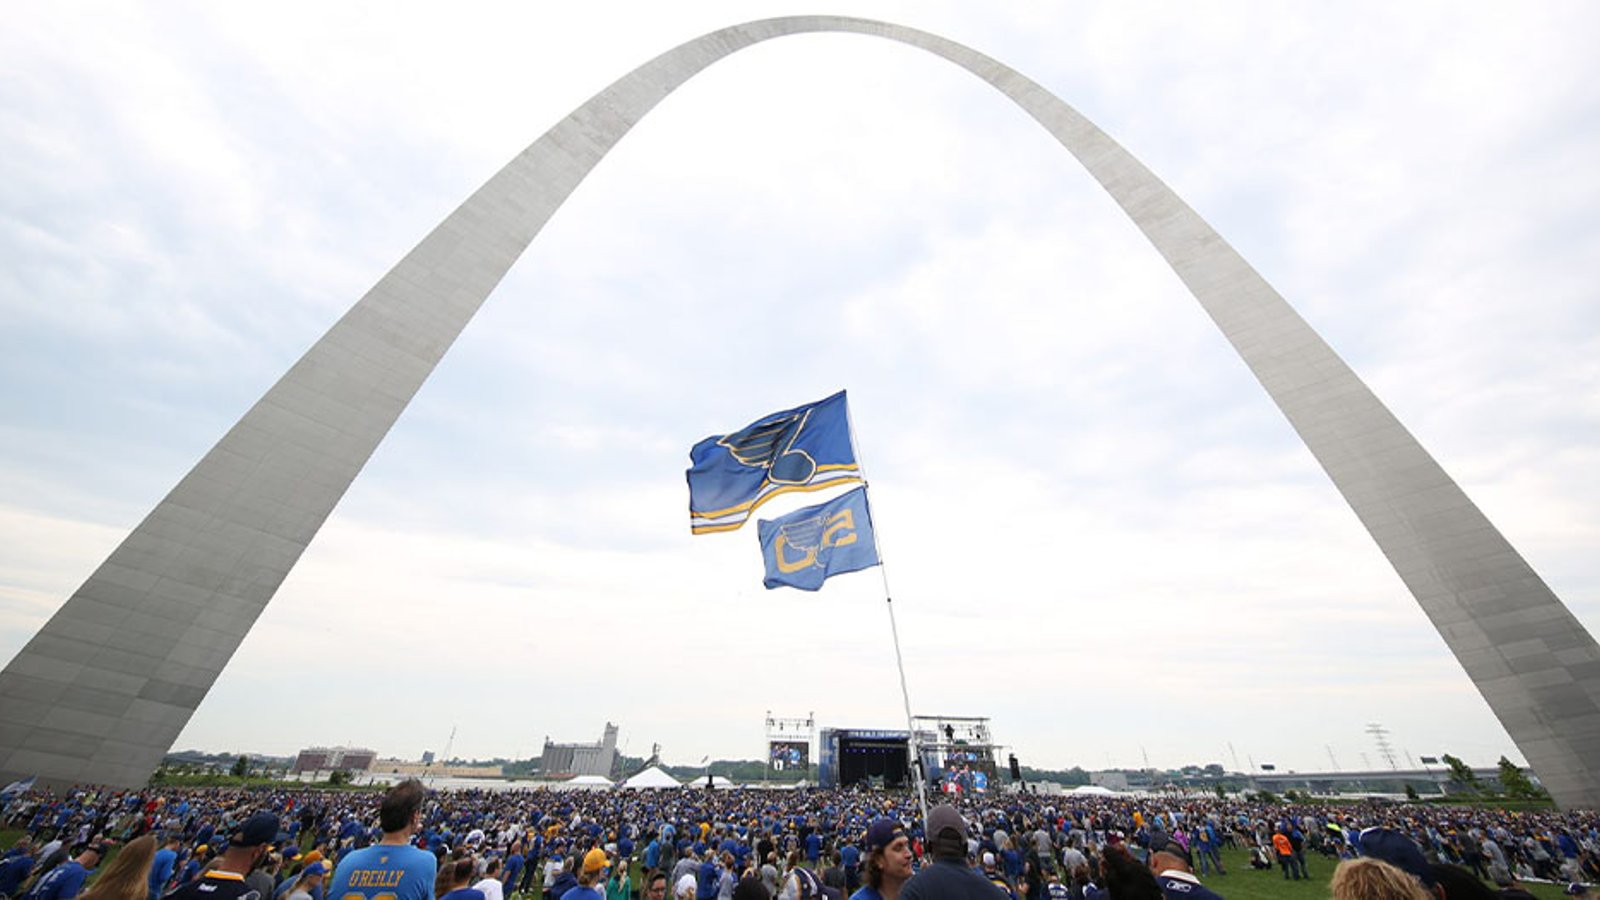 St. Louis Blues prospect robbed at gunpoint near Gateway Arch